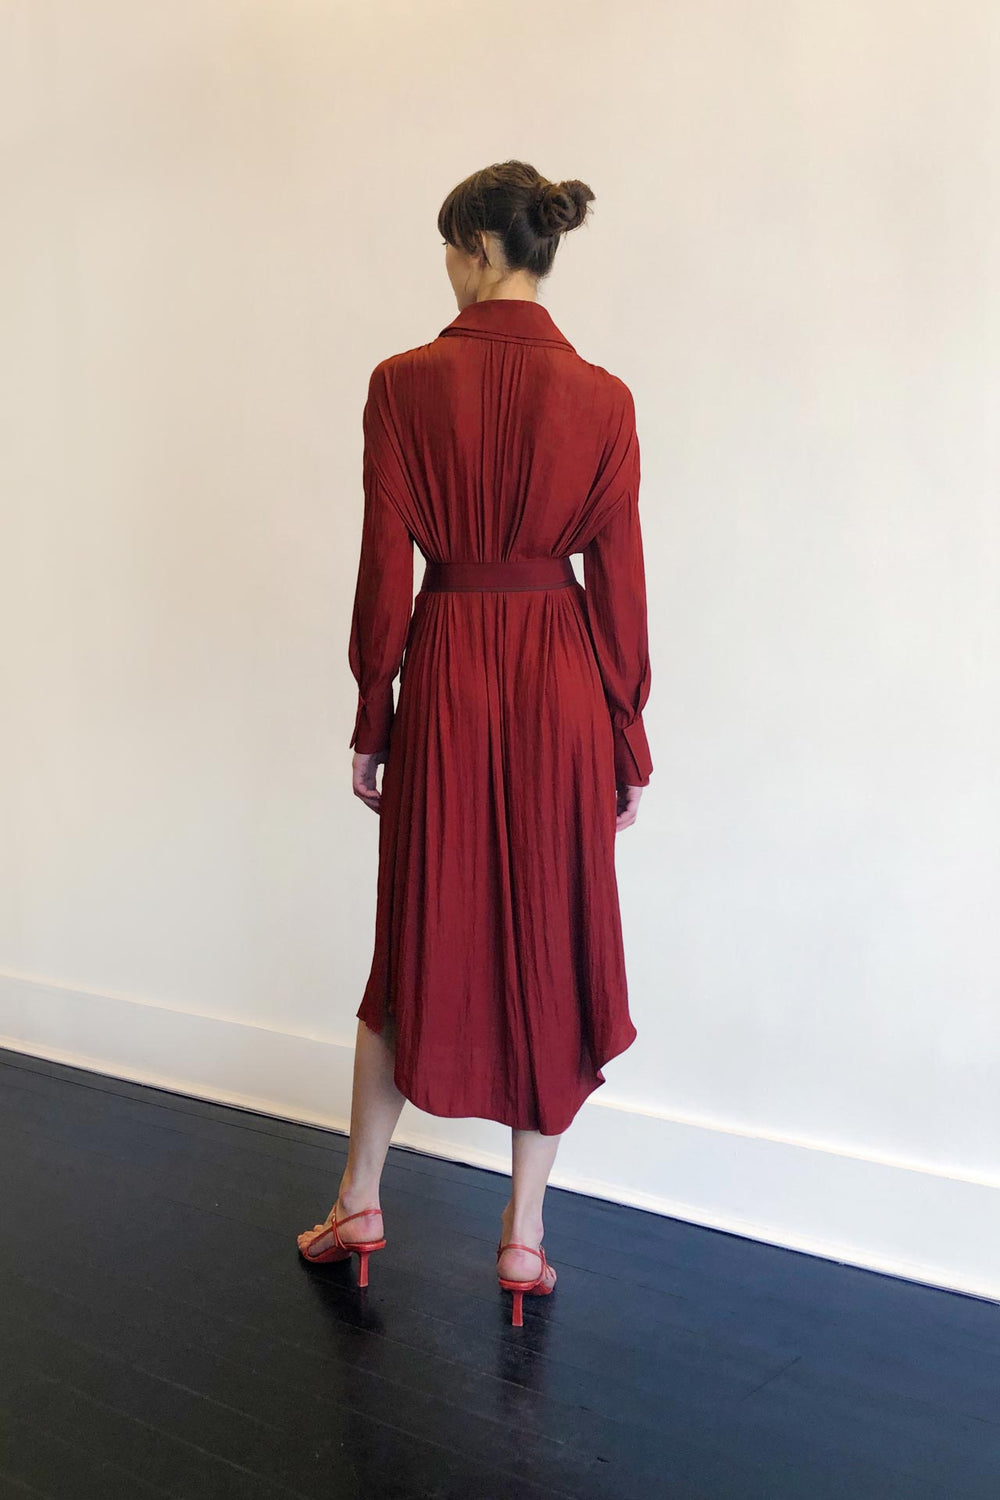 Fashion Designer CARL KAPP collection | Pheasant Onesize Fits All cocktail dress with sleeves Red | Sydney Australia